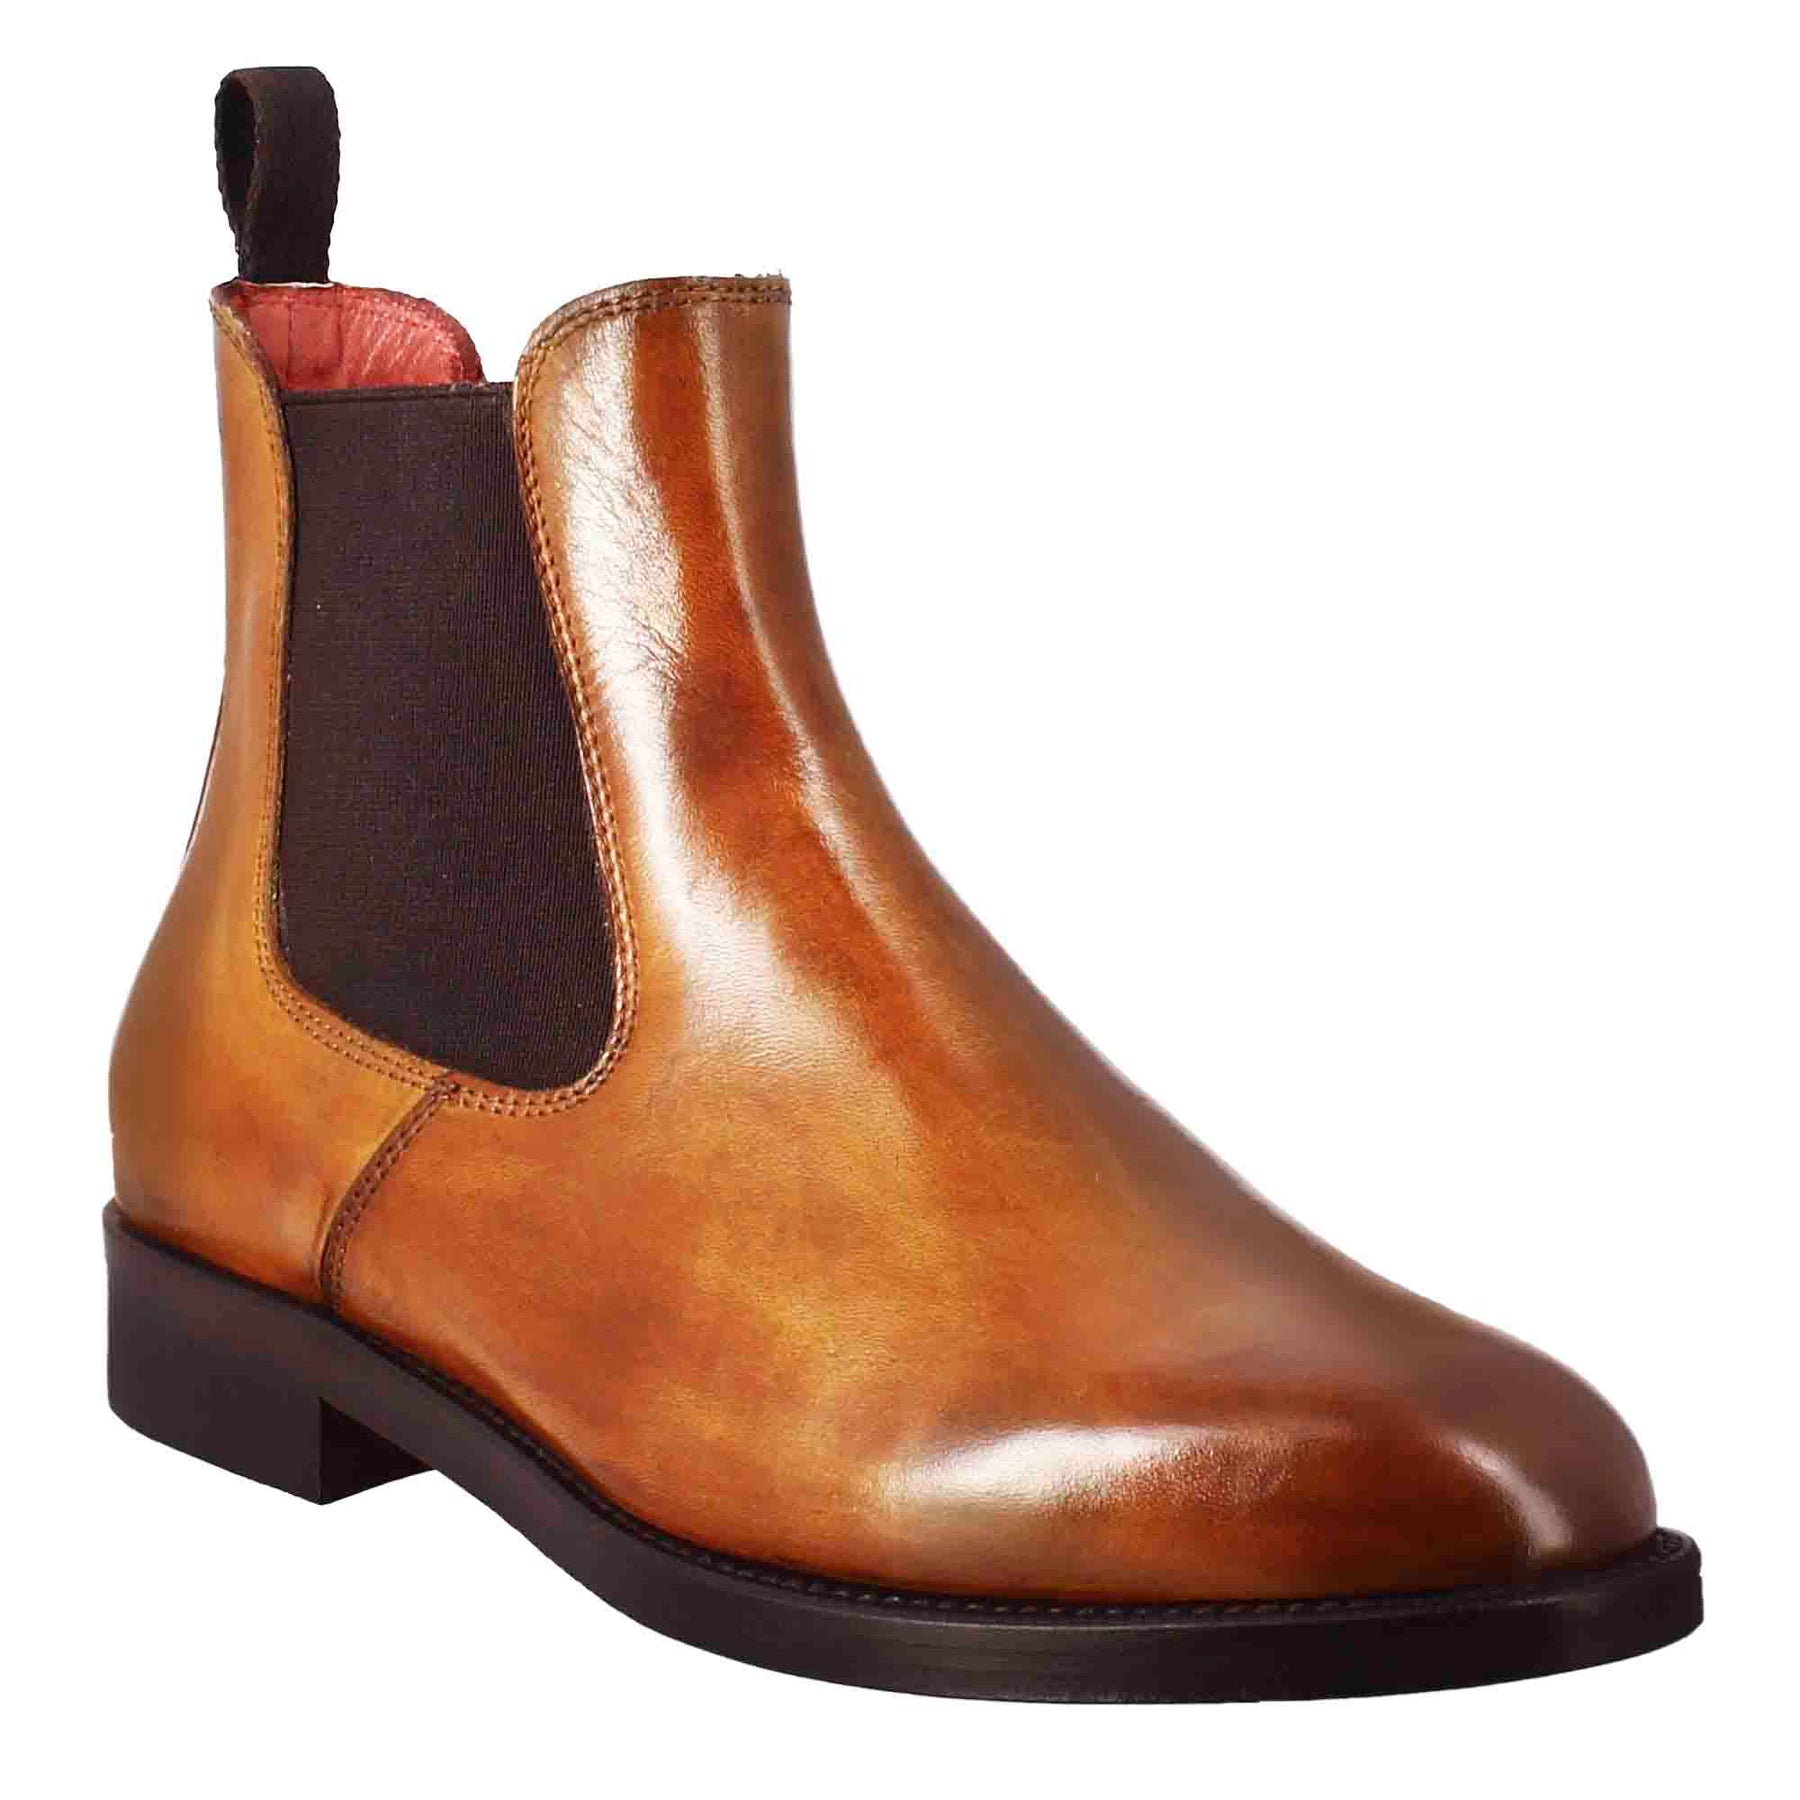 Smooth women's Chelsea boot in light brown leather